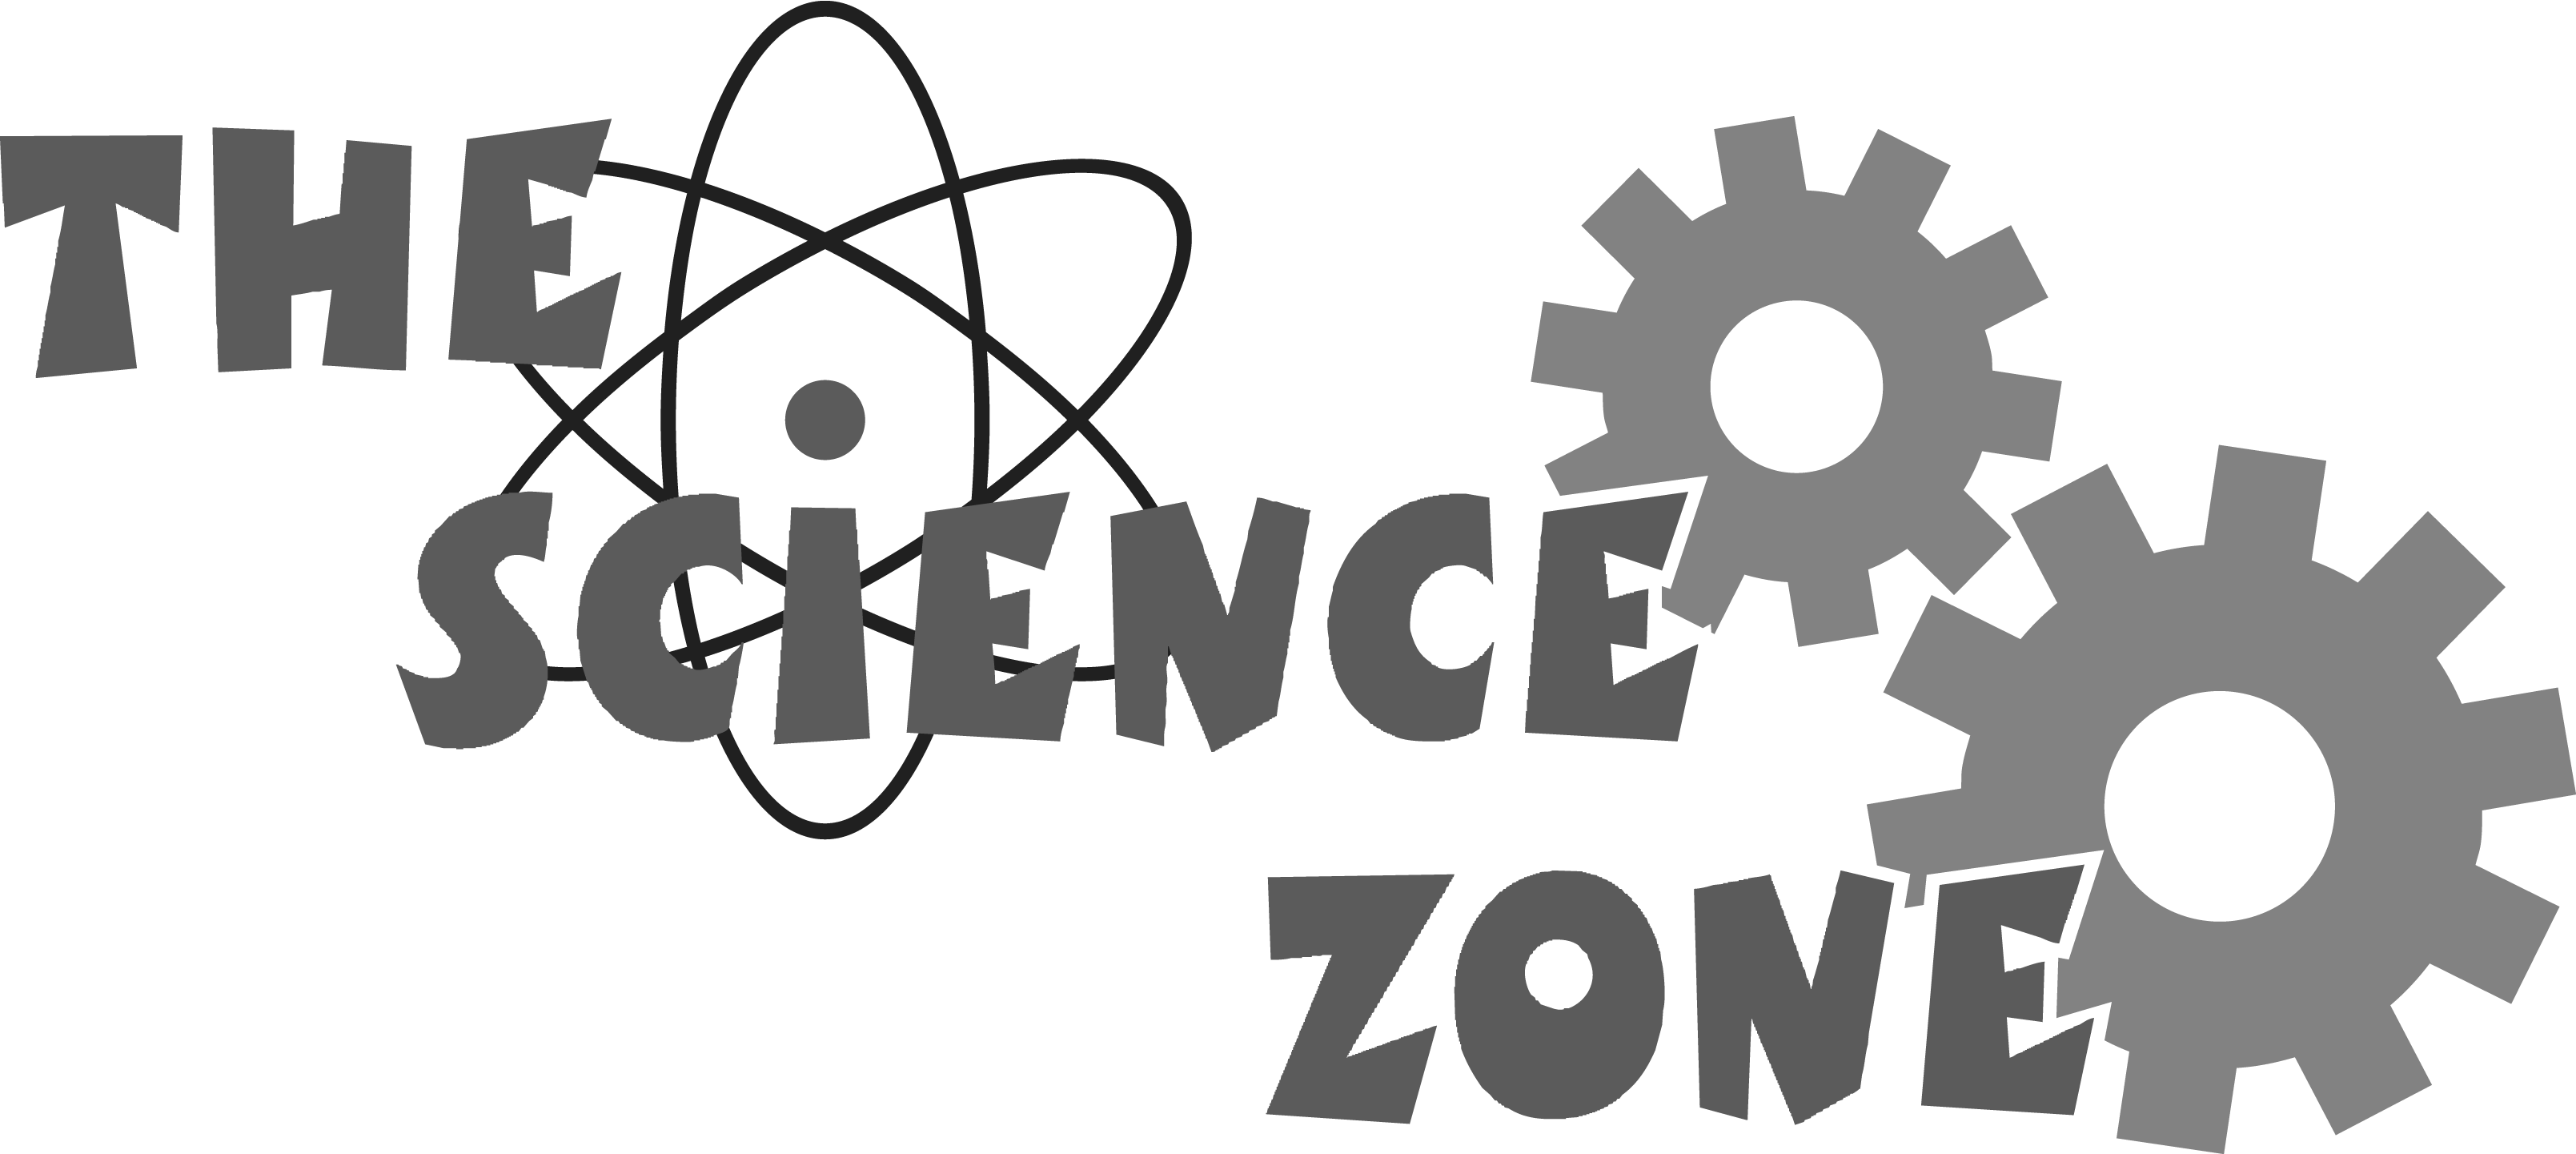 The Science Zone: Inspiring Curiosity in Wyoming Y